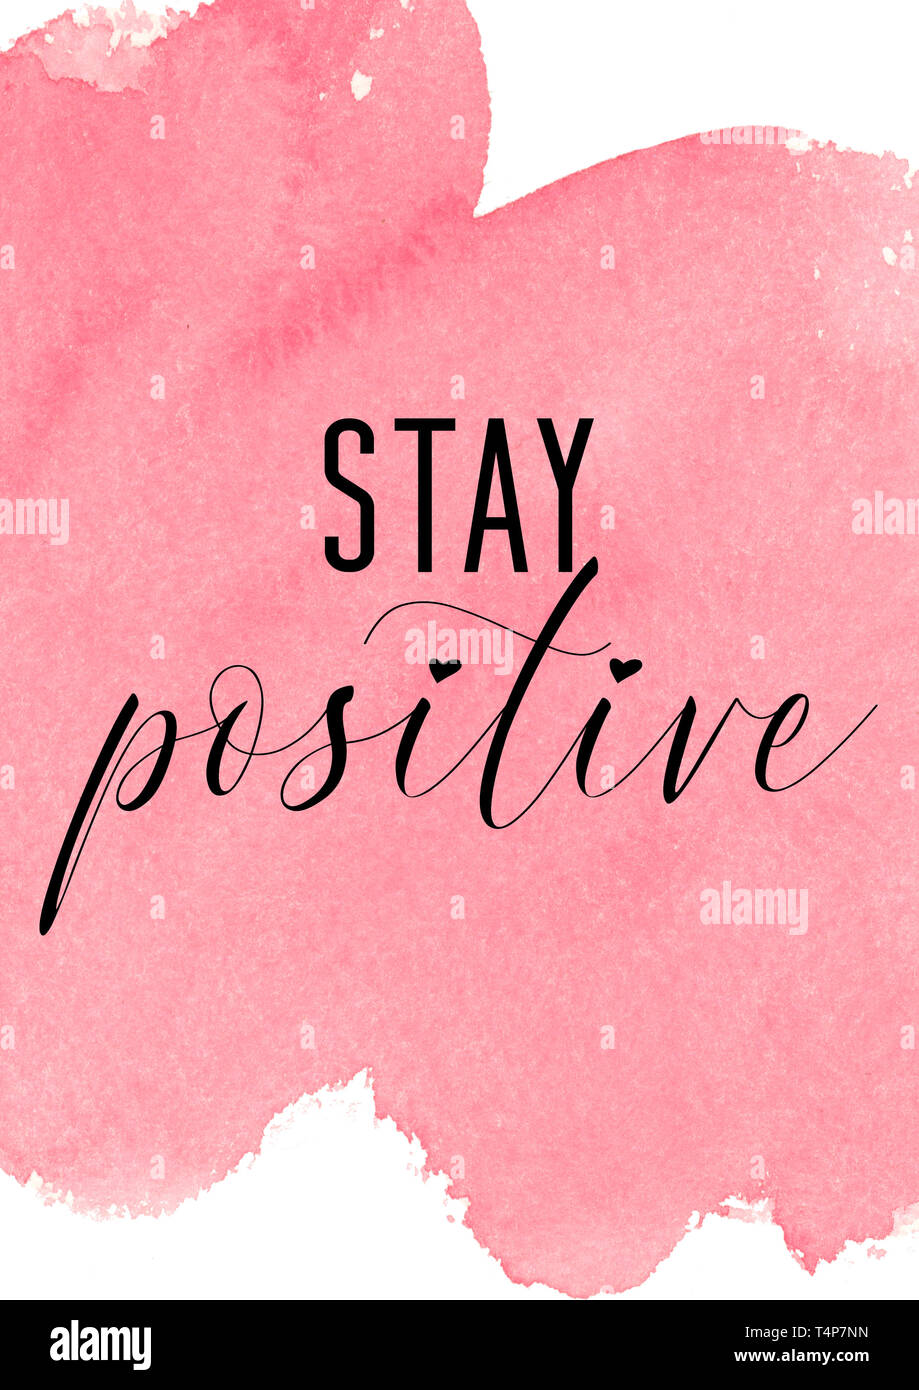 Stay positive. Inspiring quote with pink watercolor background ...